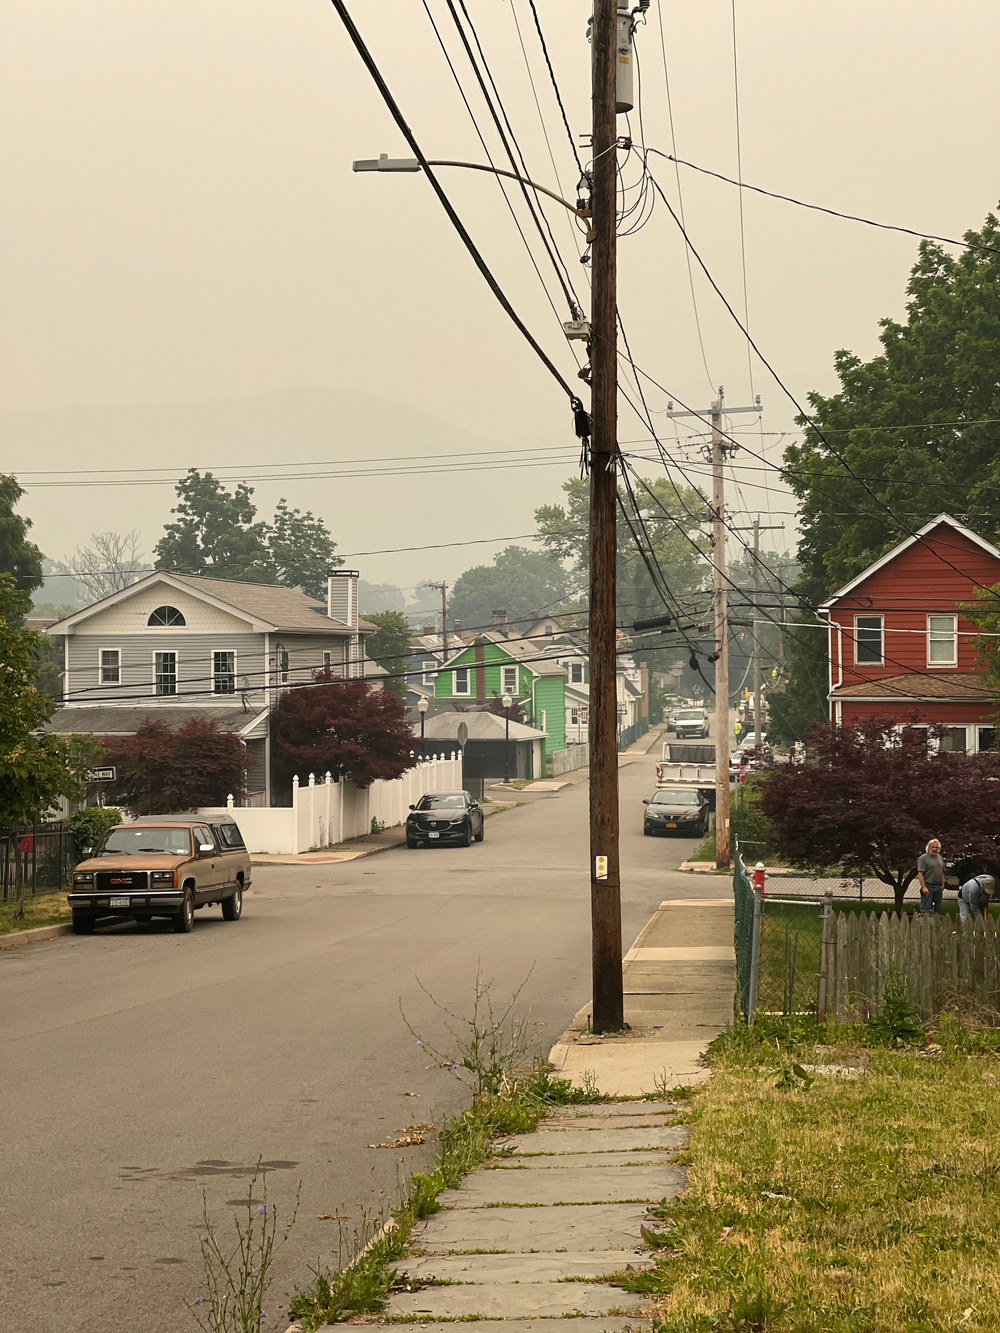 View down the street in Beacon, NY. Mountains totally obscured by wildfire smoke.